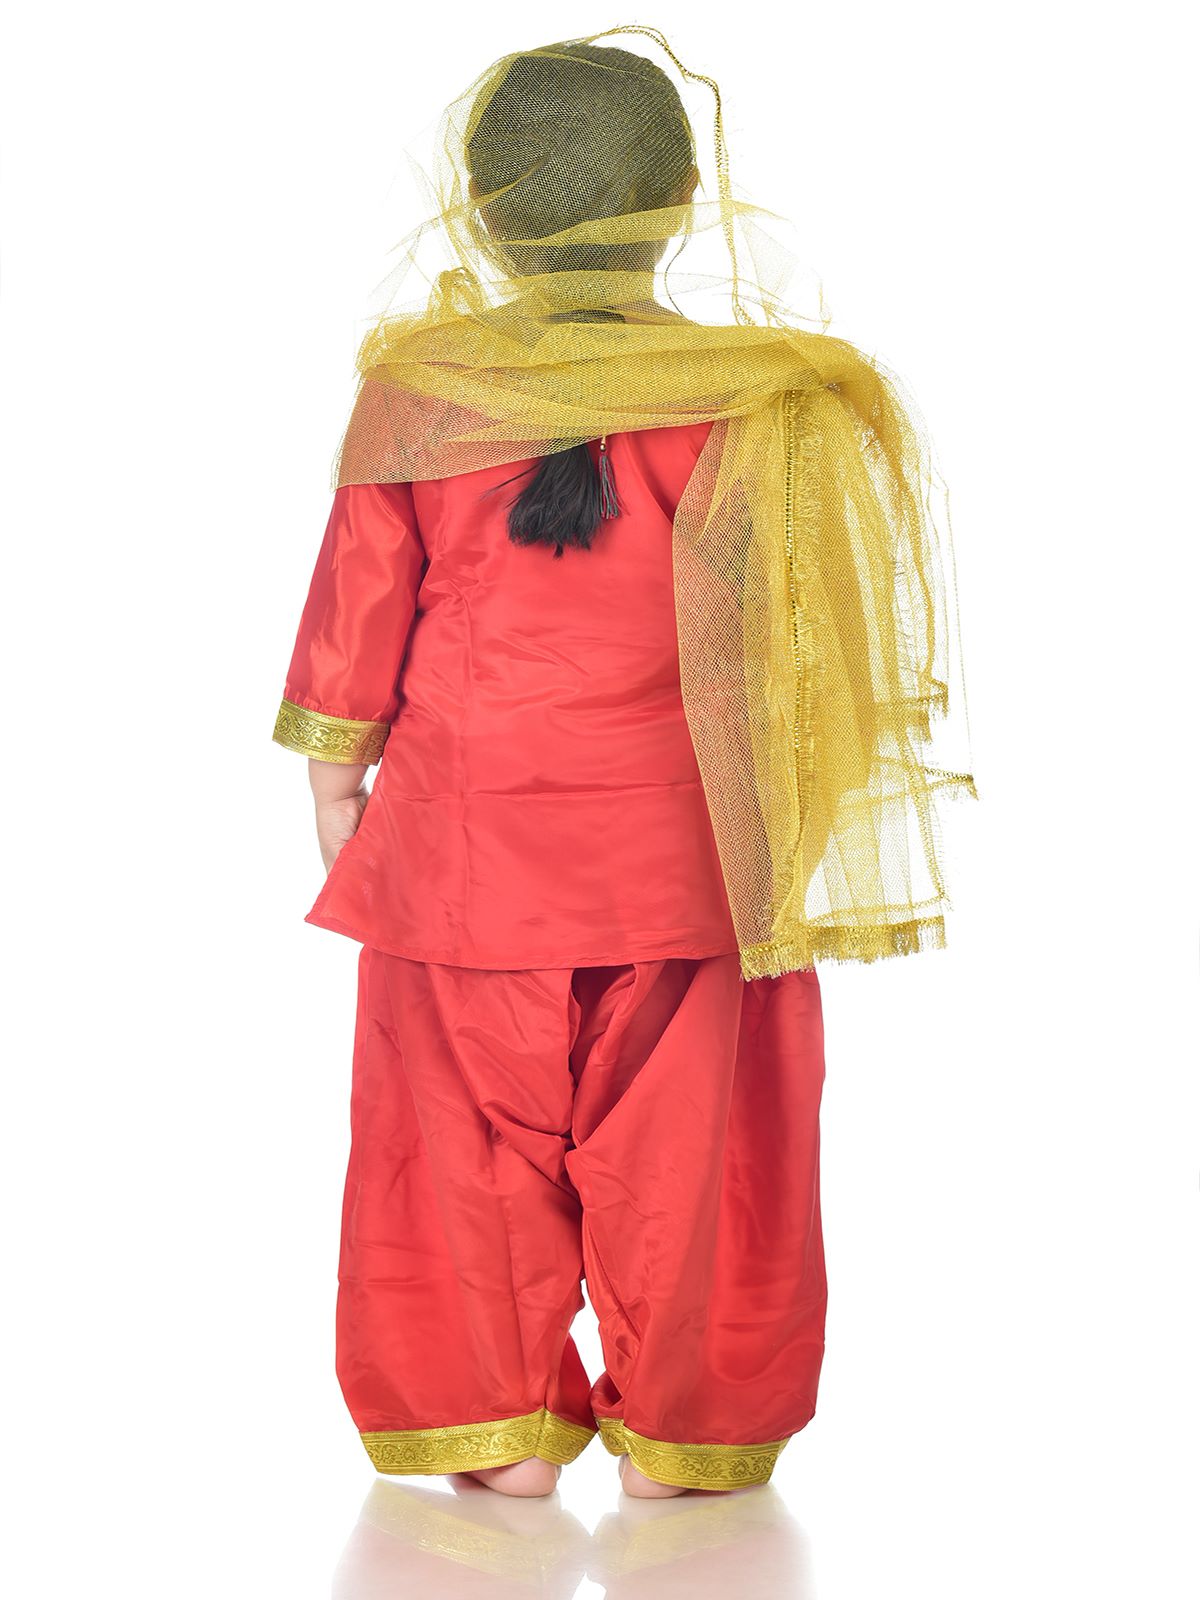 Giddha Dance Dress at Best Price in Jalandhar | The Vibz Costume Suppliers